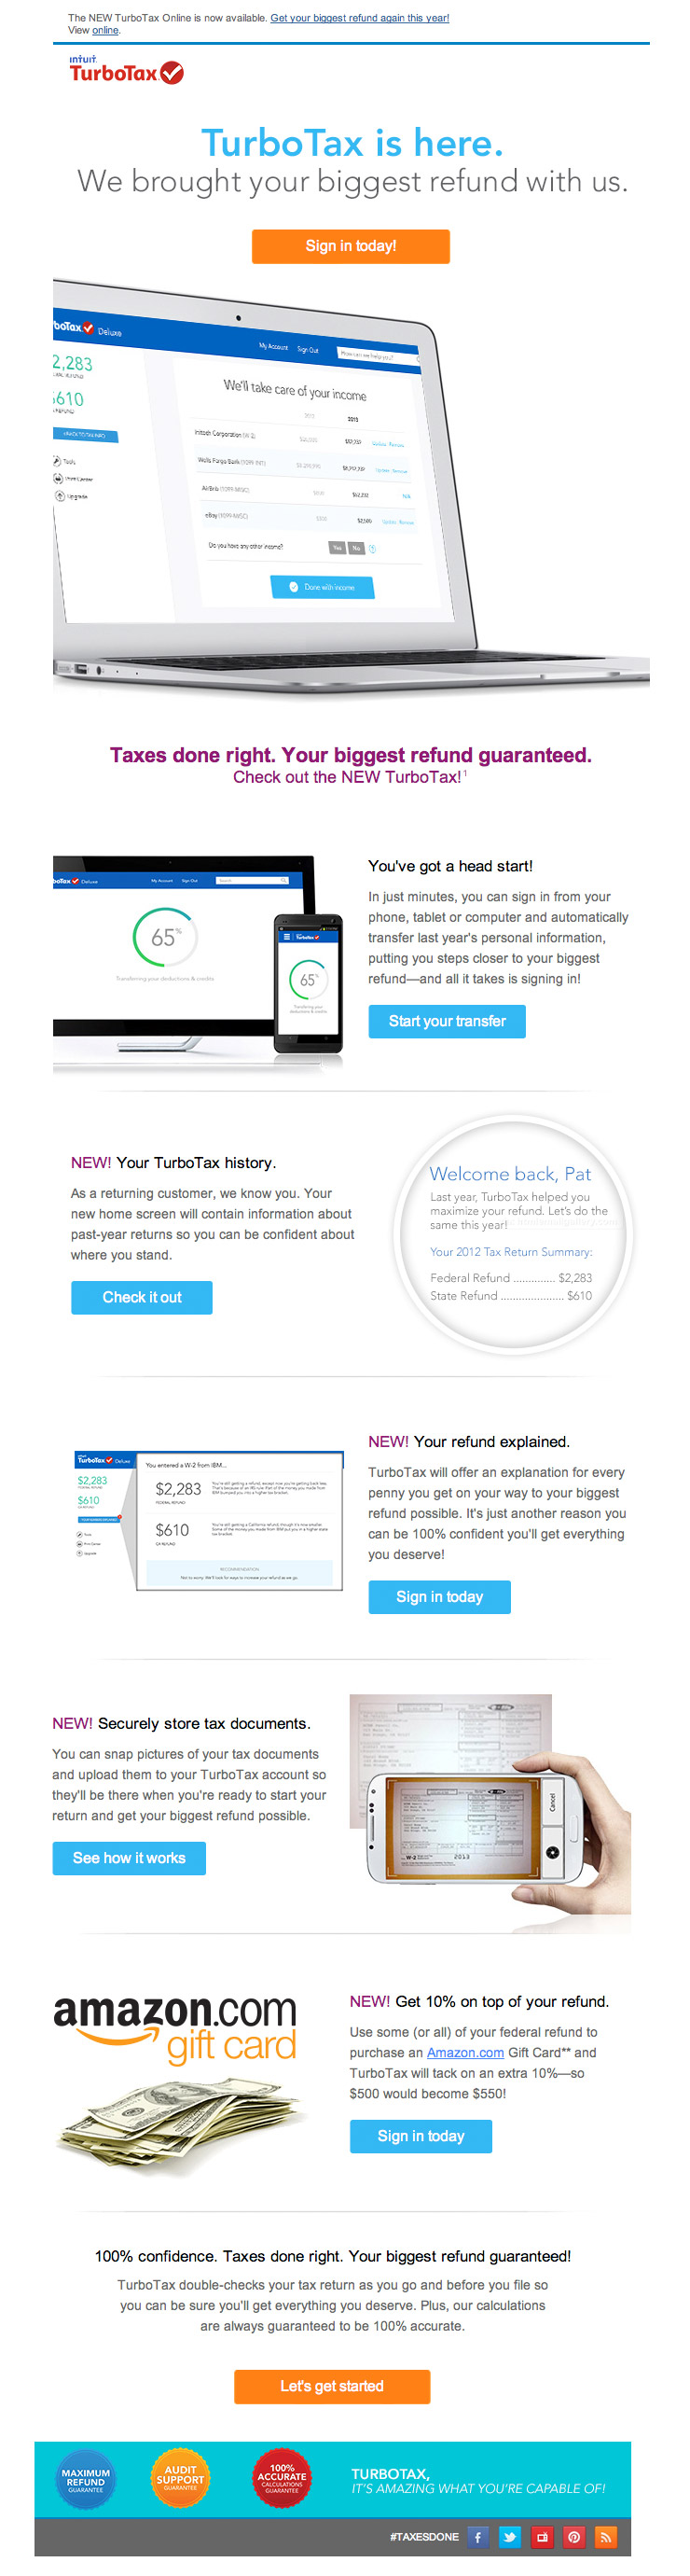 TurboTax Online Welcome email